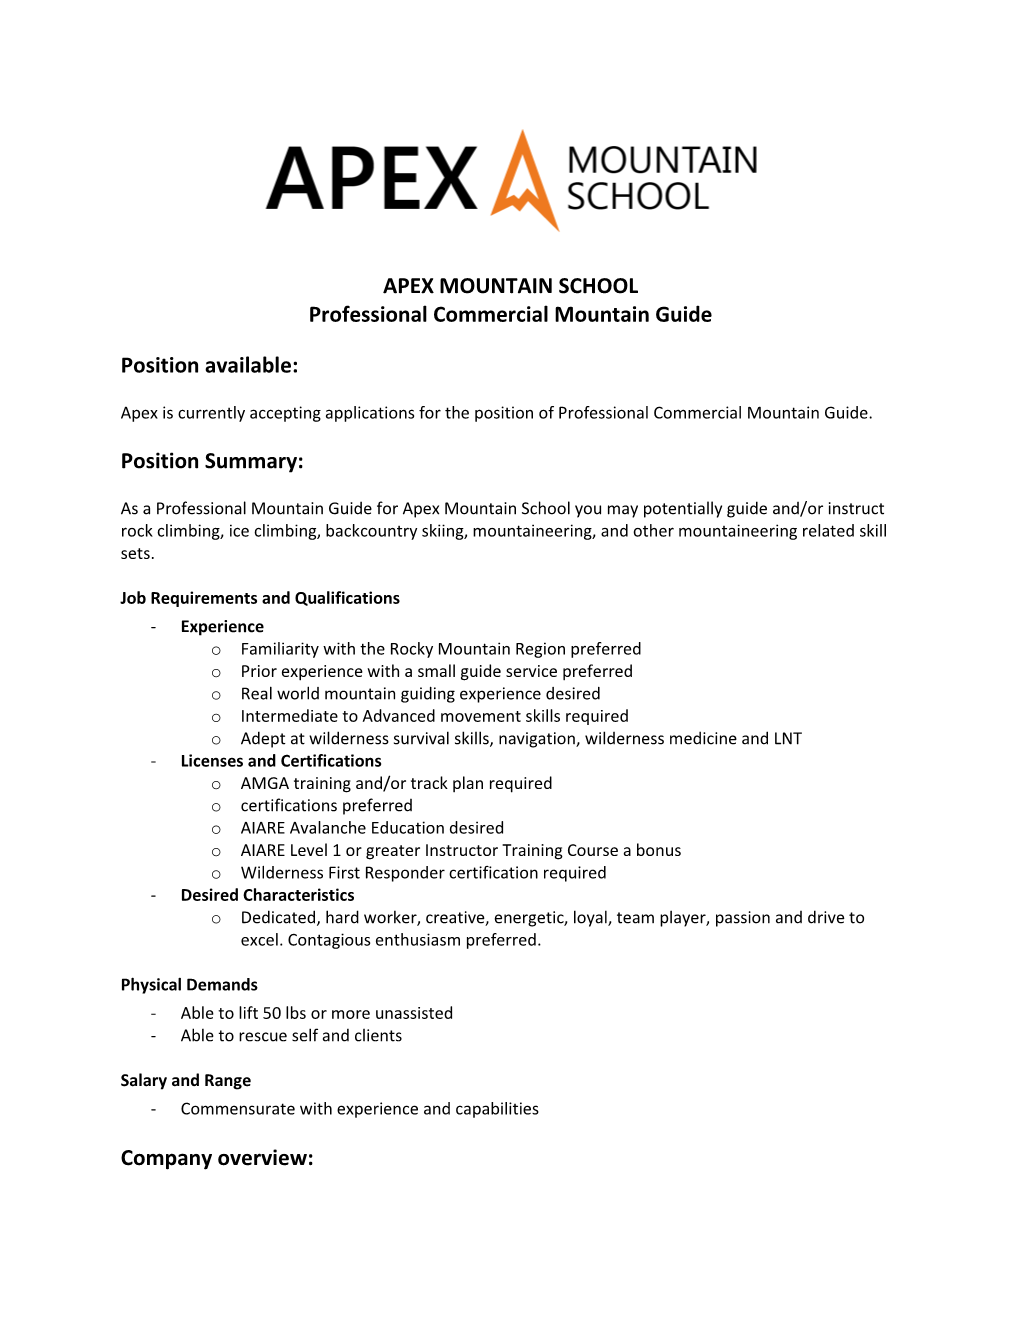 APEX MOUNTAIN SCHOOL Professional Commercial Mountain Guide